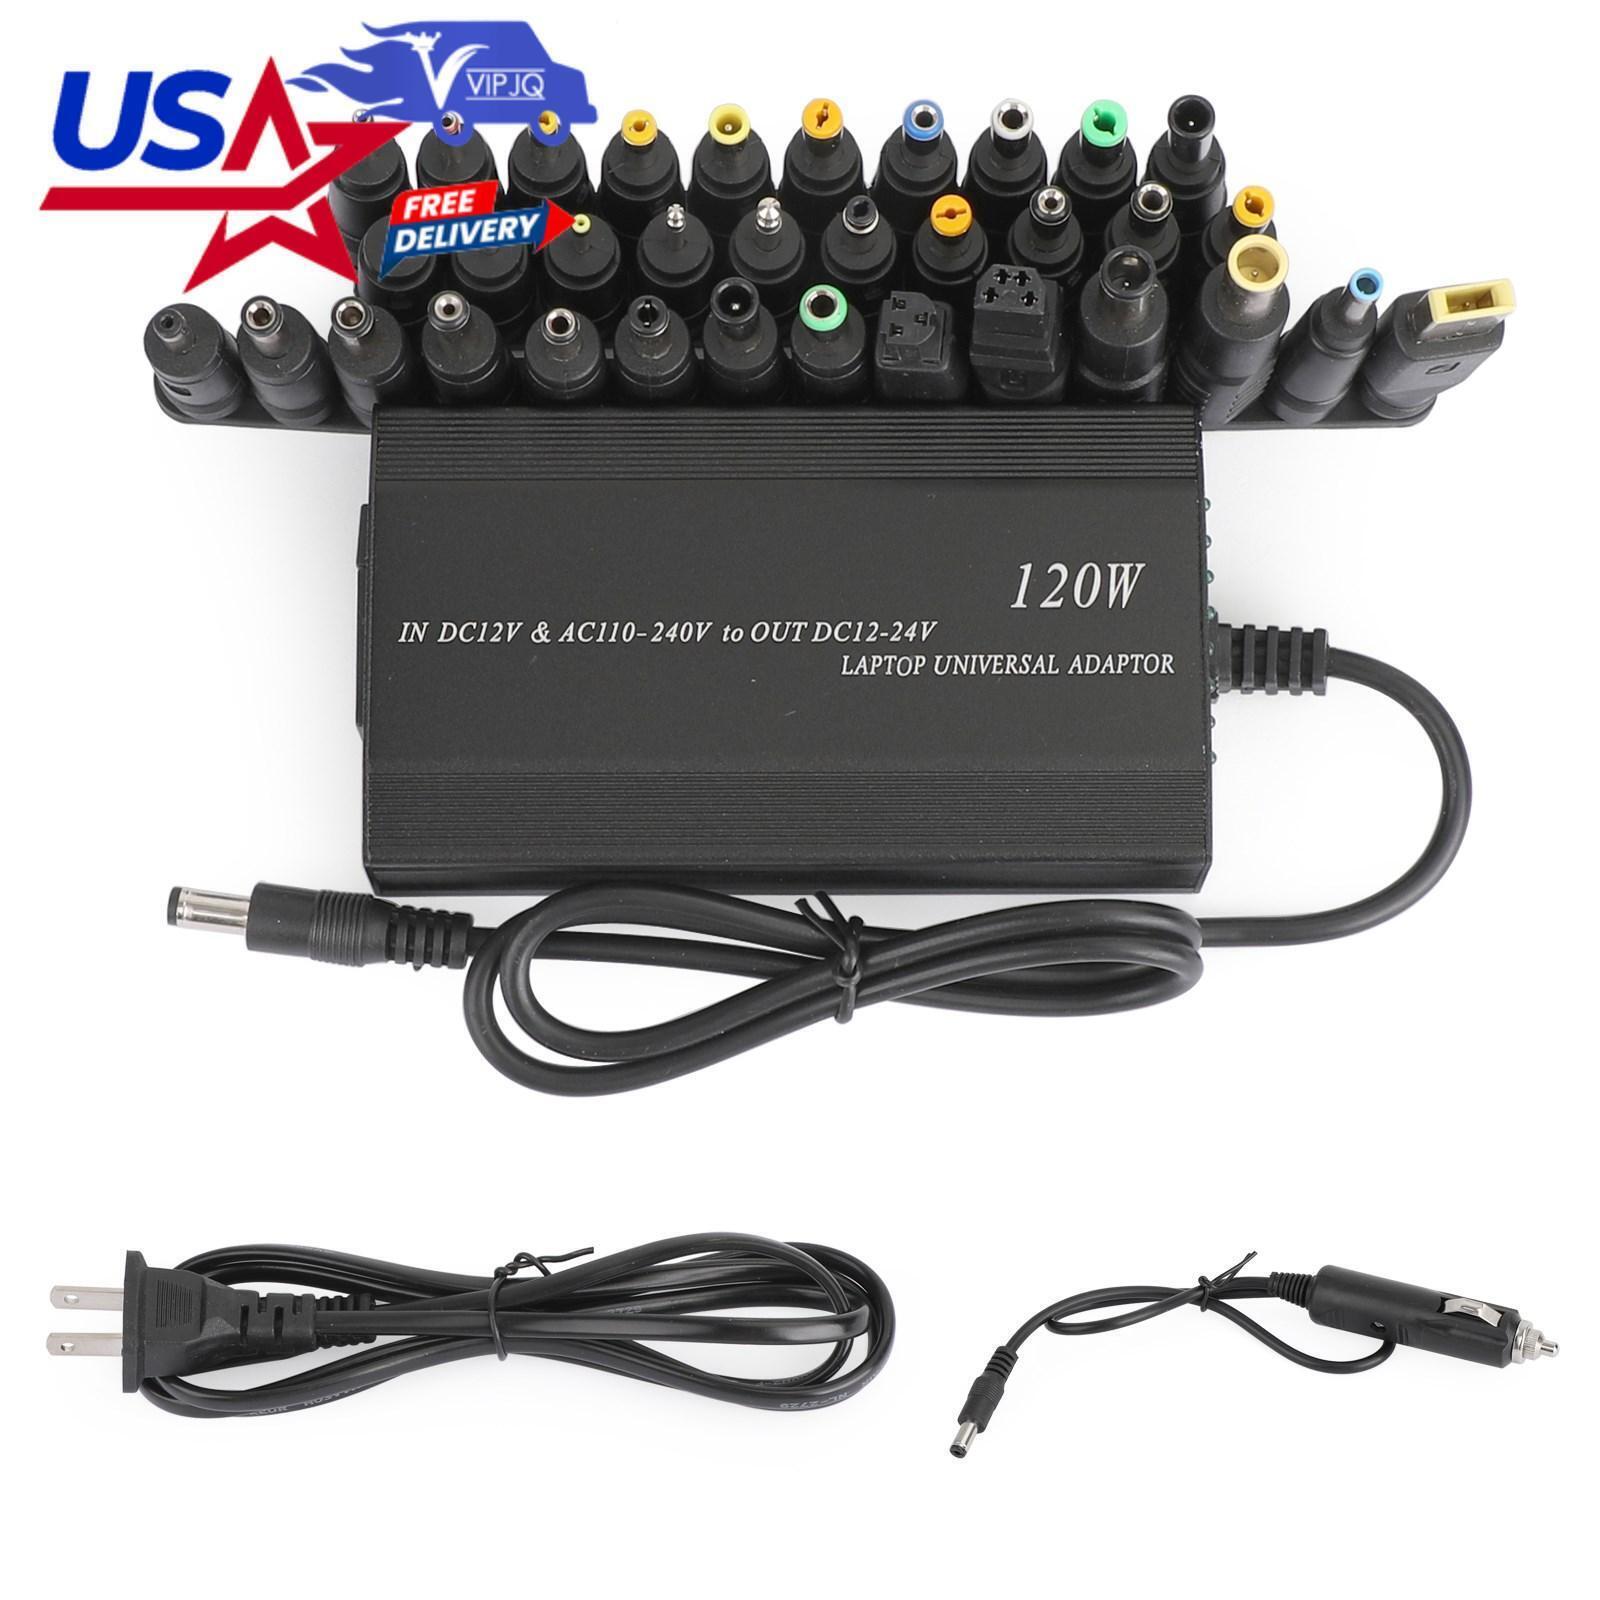 120W Car Home 34 Tips Power Supply Adapter Charger for Laptop Notebook US Plug